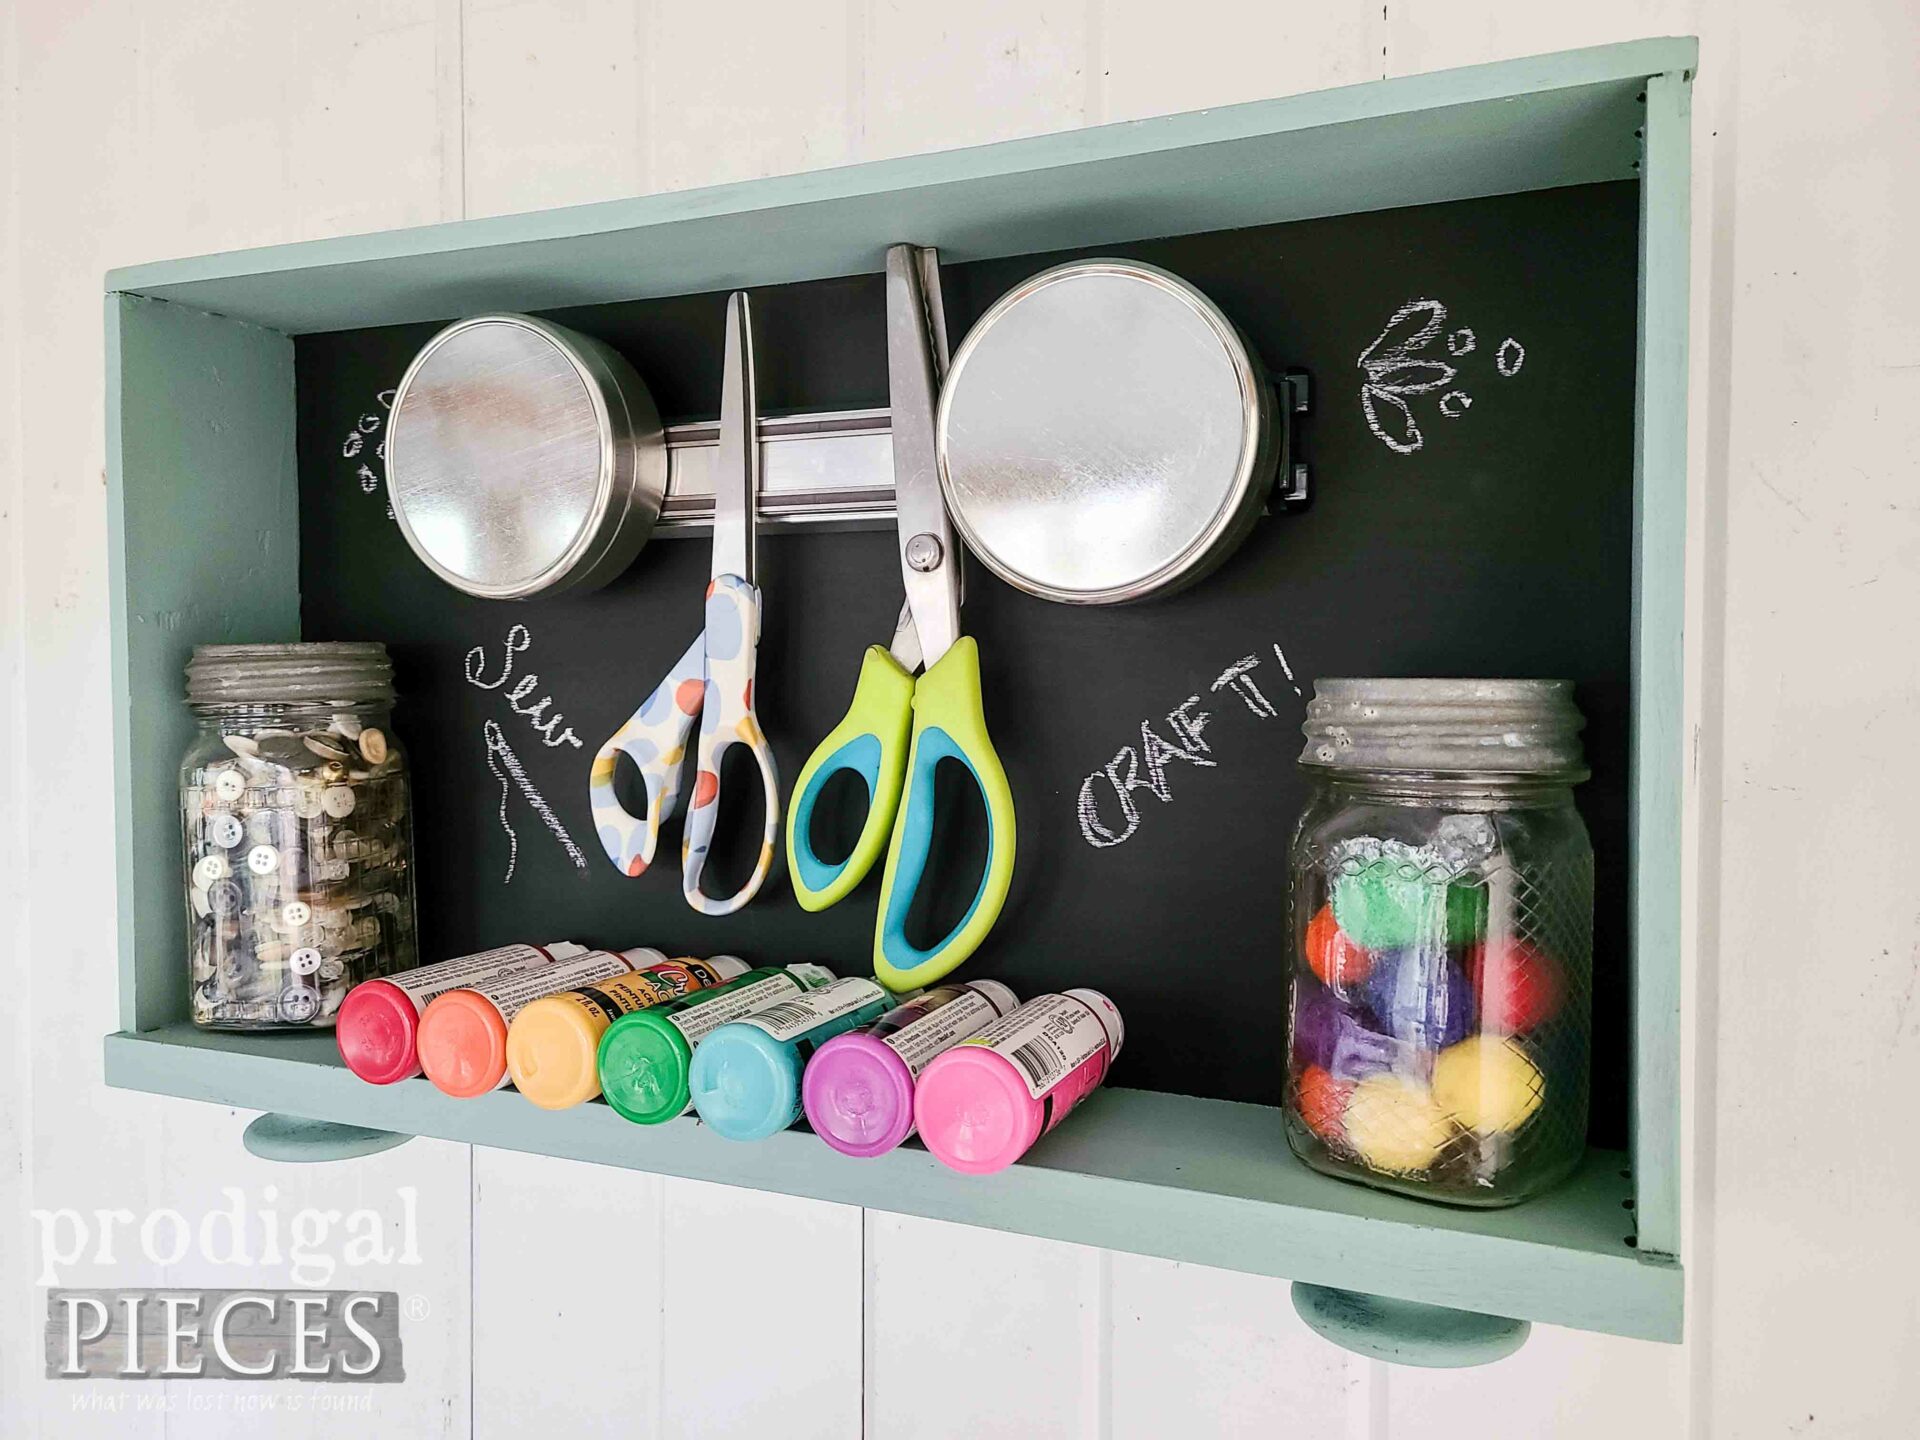 Crafty DIY Magnetic Storage from Upcycled Vanity Drawer by Larissa of Prodigal Pieces | prodigalpieces.com #prodigalpieces #upcycled #repurposed